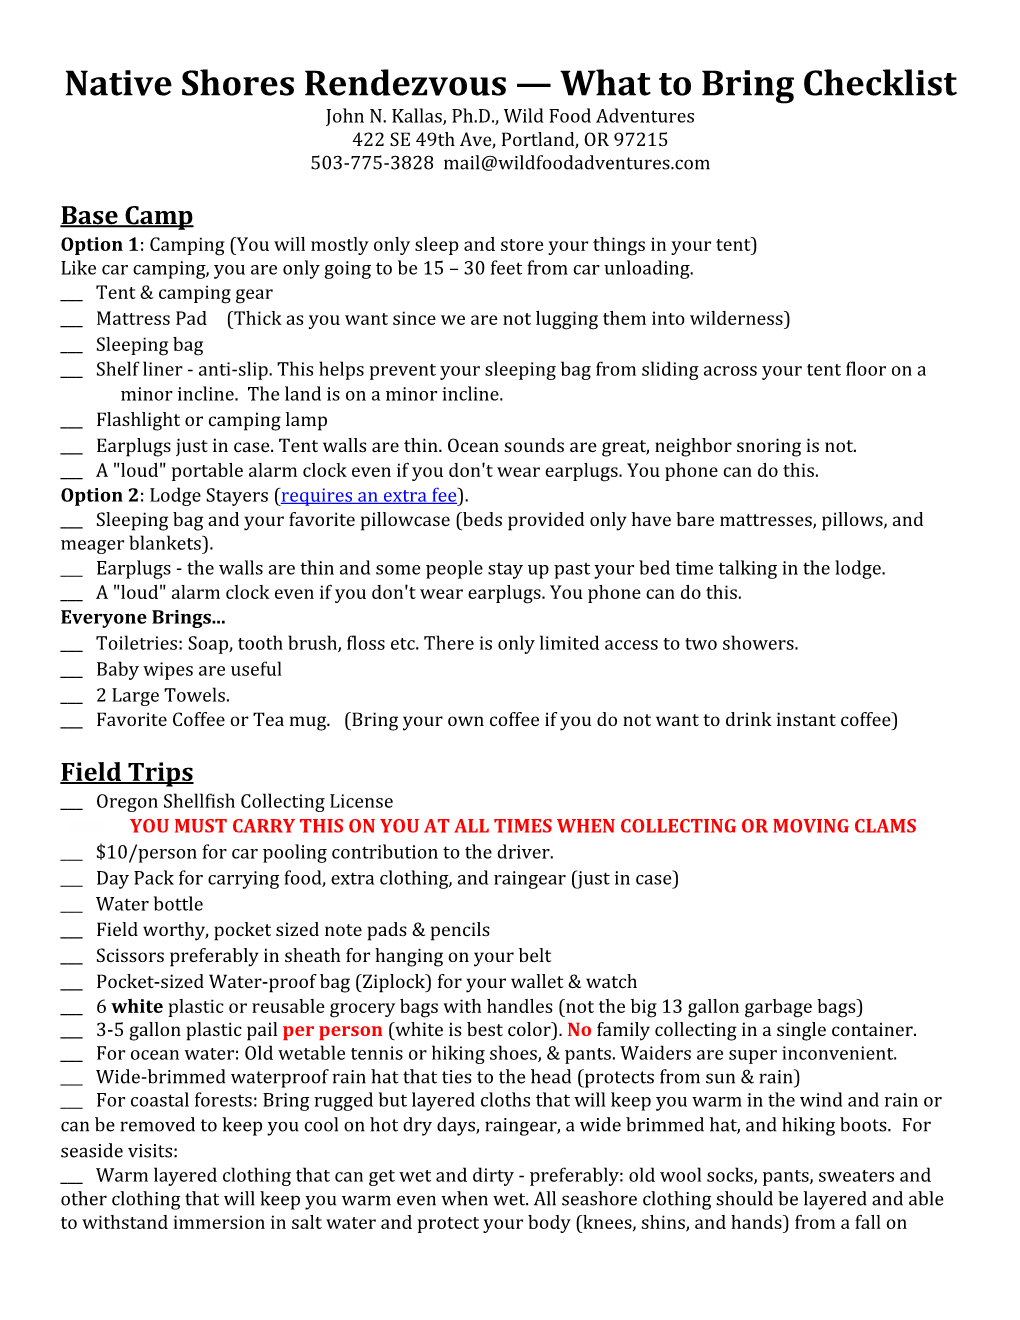 Native Shores Rendezvous — What to Bring Checklist John N